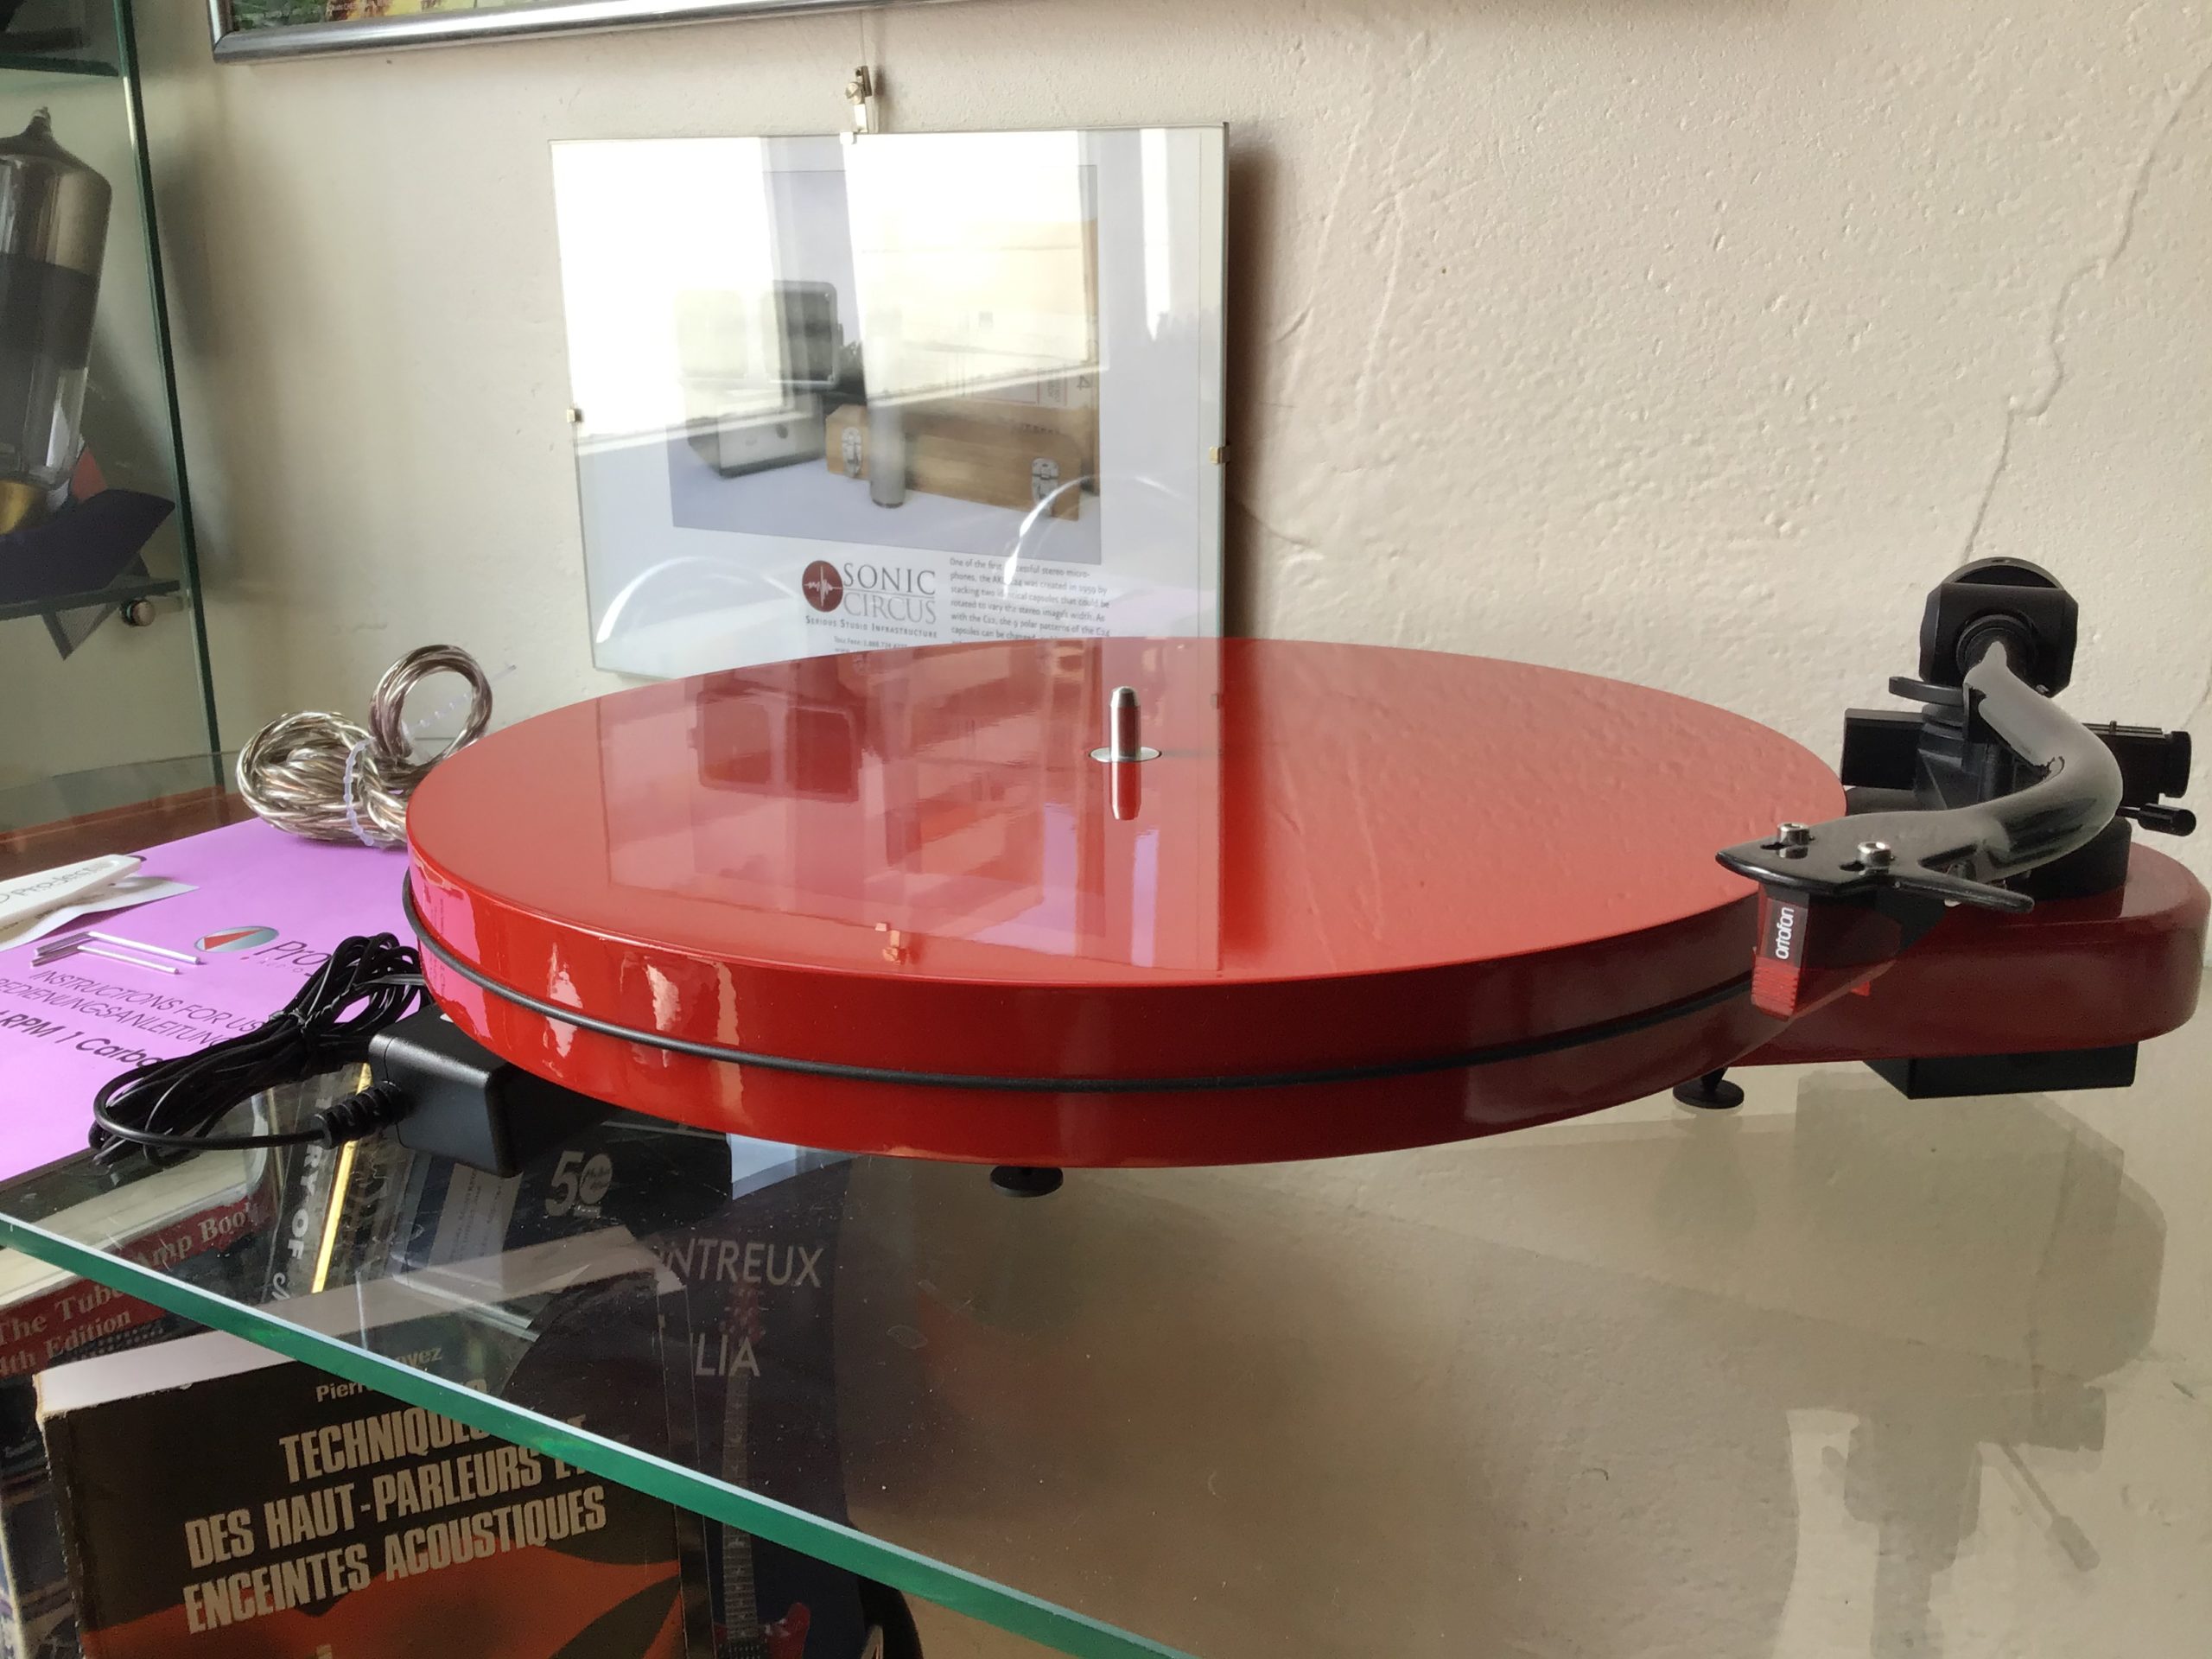 Pro-Ject RPM-1 Carbon RED